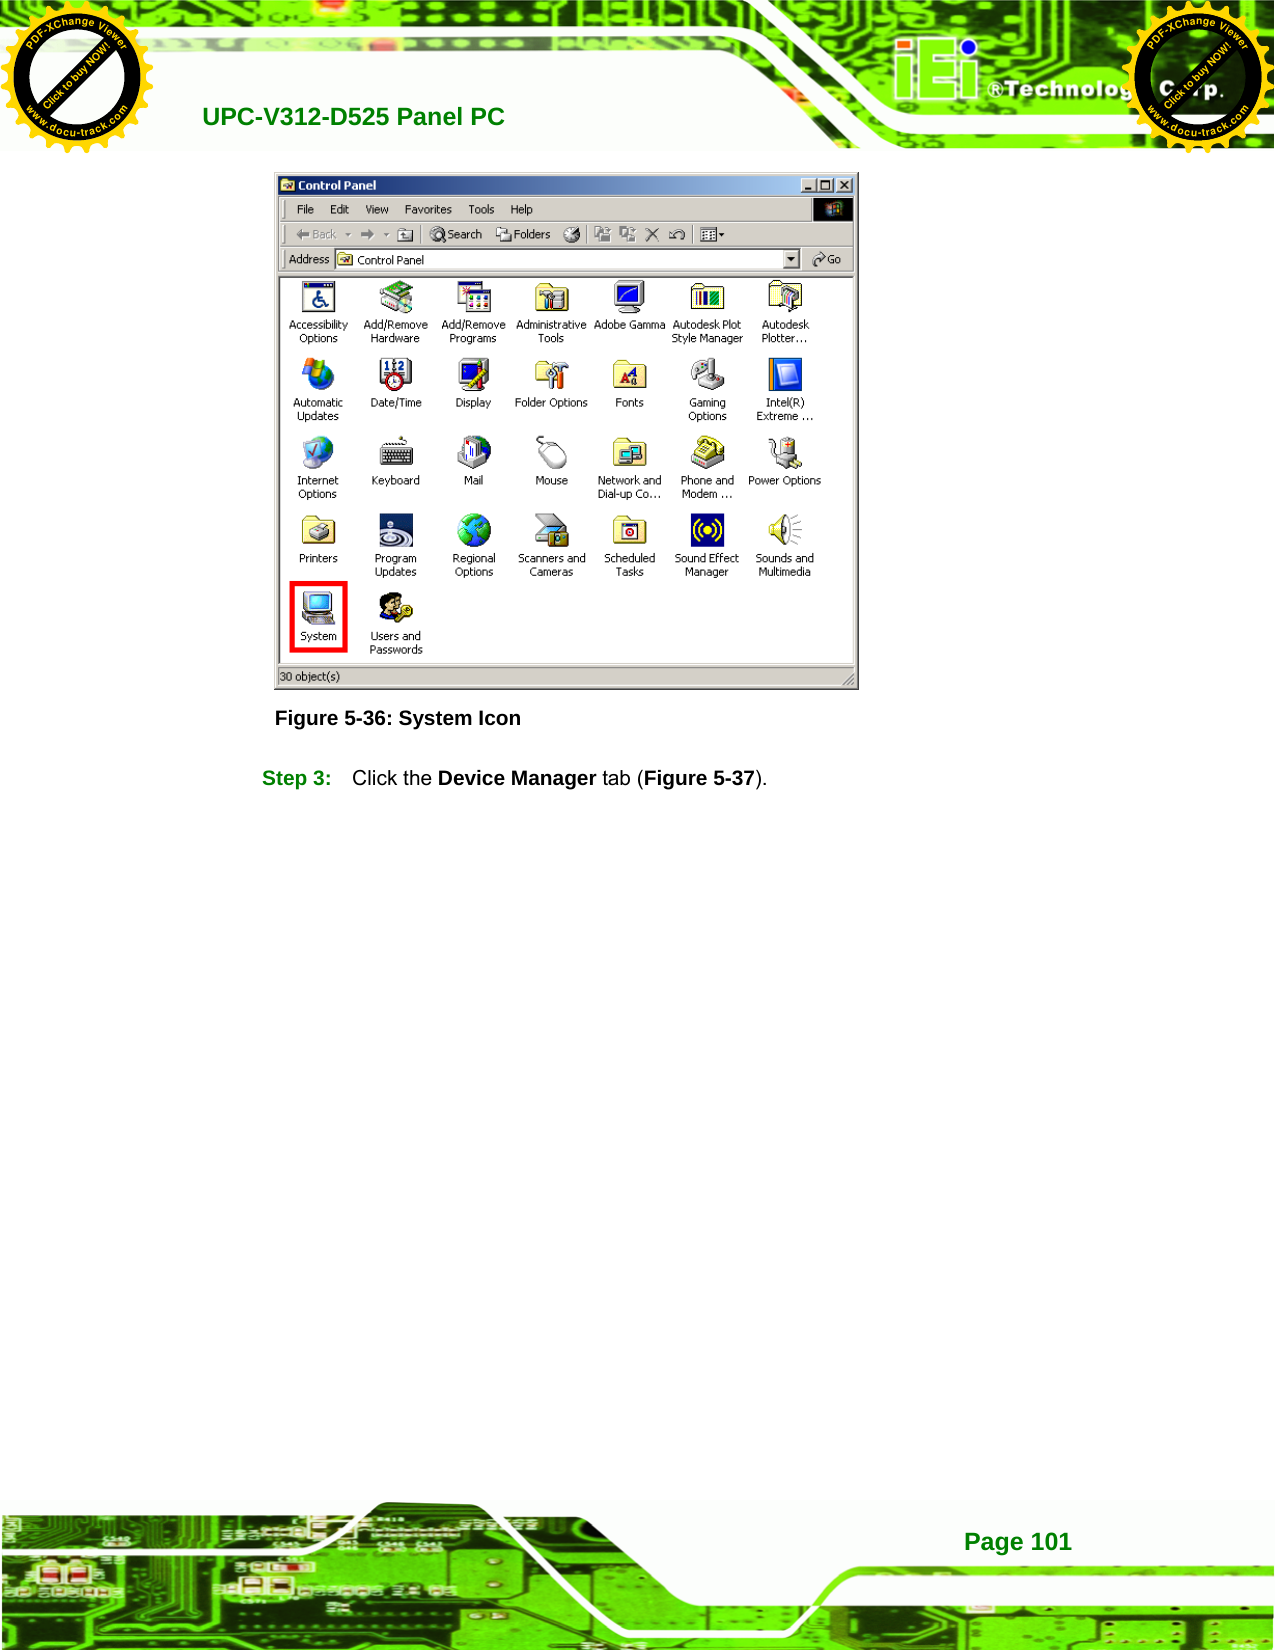   UPC-V312-D525 Panel PC Page 101 Figure 5-36: System Icon Step 3:  Click the Device Manager tab (Figure 5-37). Click to buy NOW!PDF-XChange Viewerwww.docu-track.comClick to buy NOW!PDF-XChange Viewerwww.docu-track.com